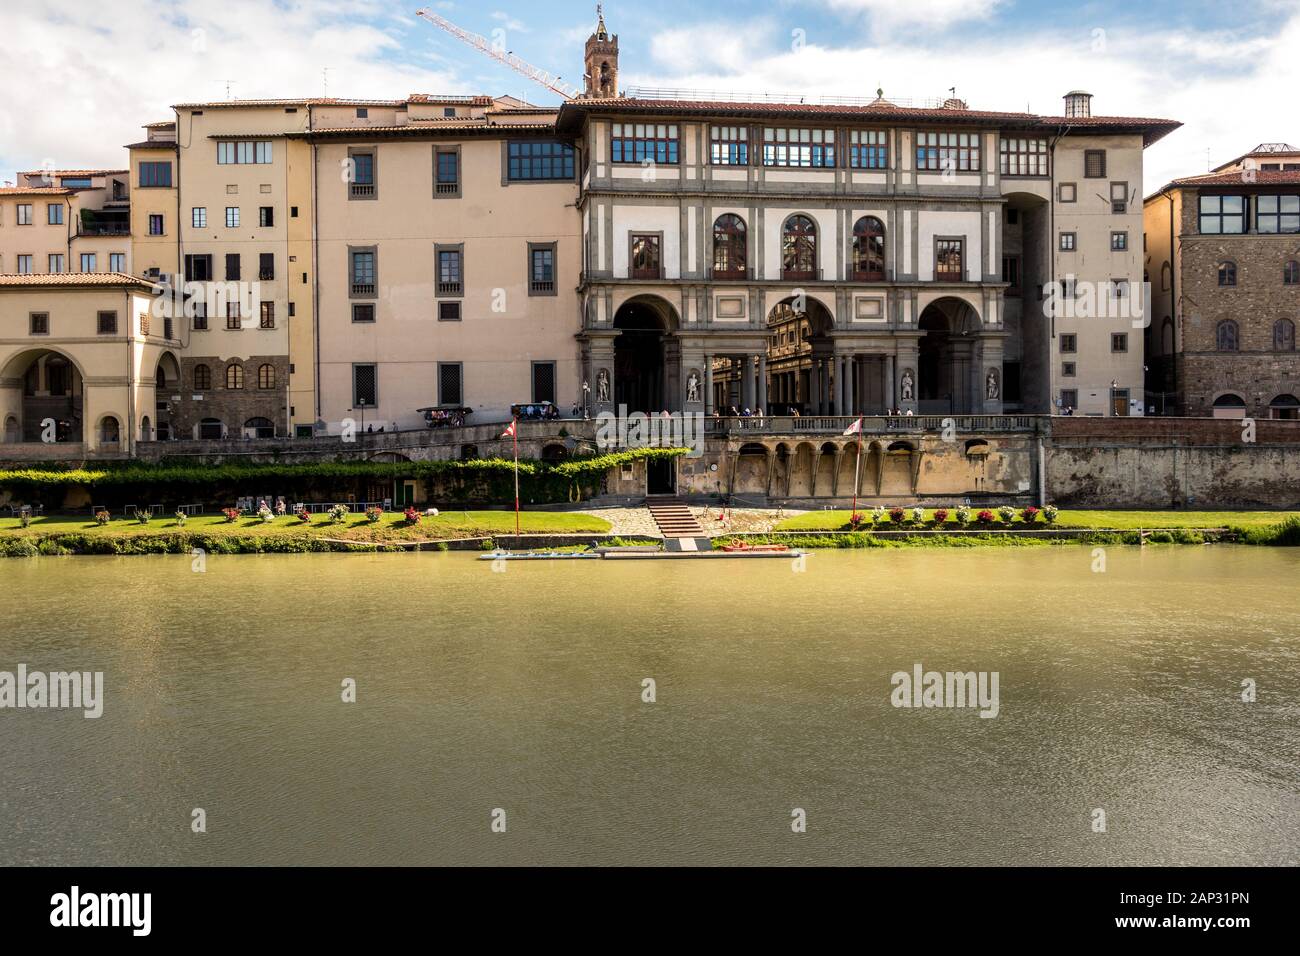 Looking over the river Amo towards to the Museo Nazionale del Bargello an Art museum that houses Renaissance sculptures including works by Michelangel Stock Photo